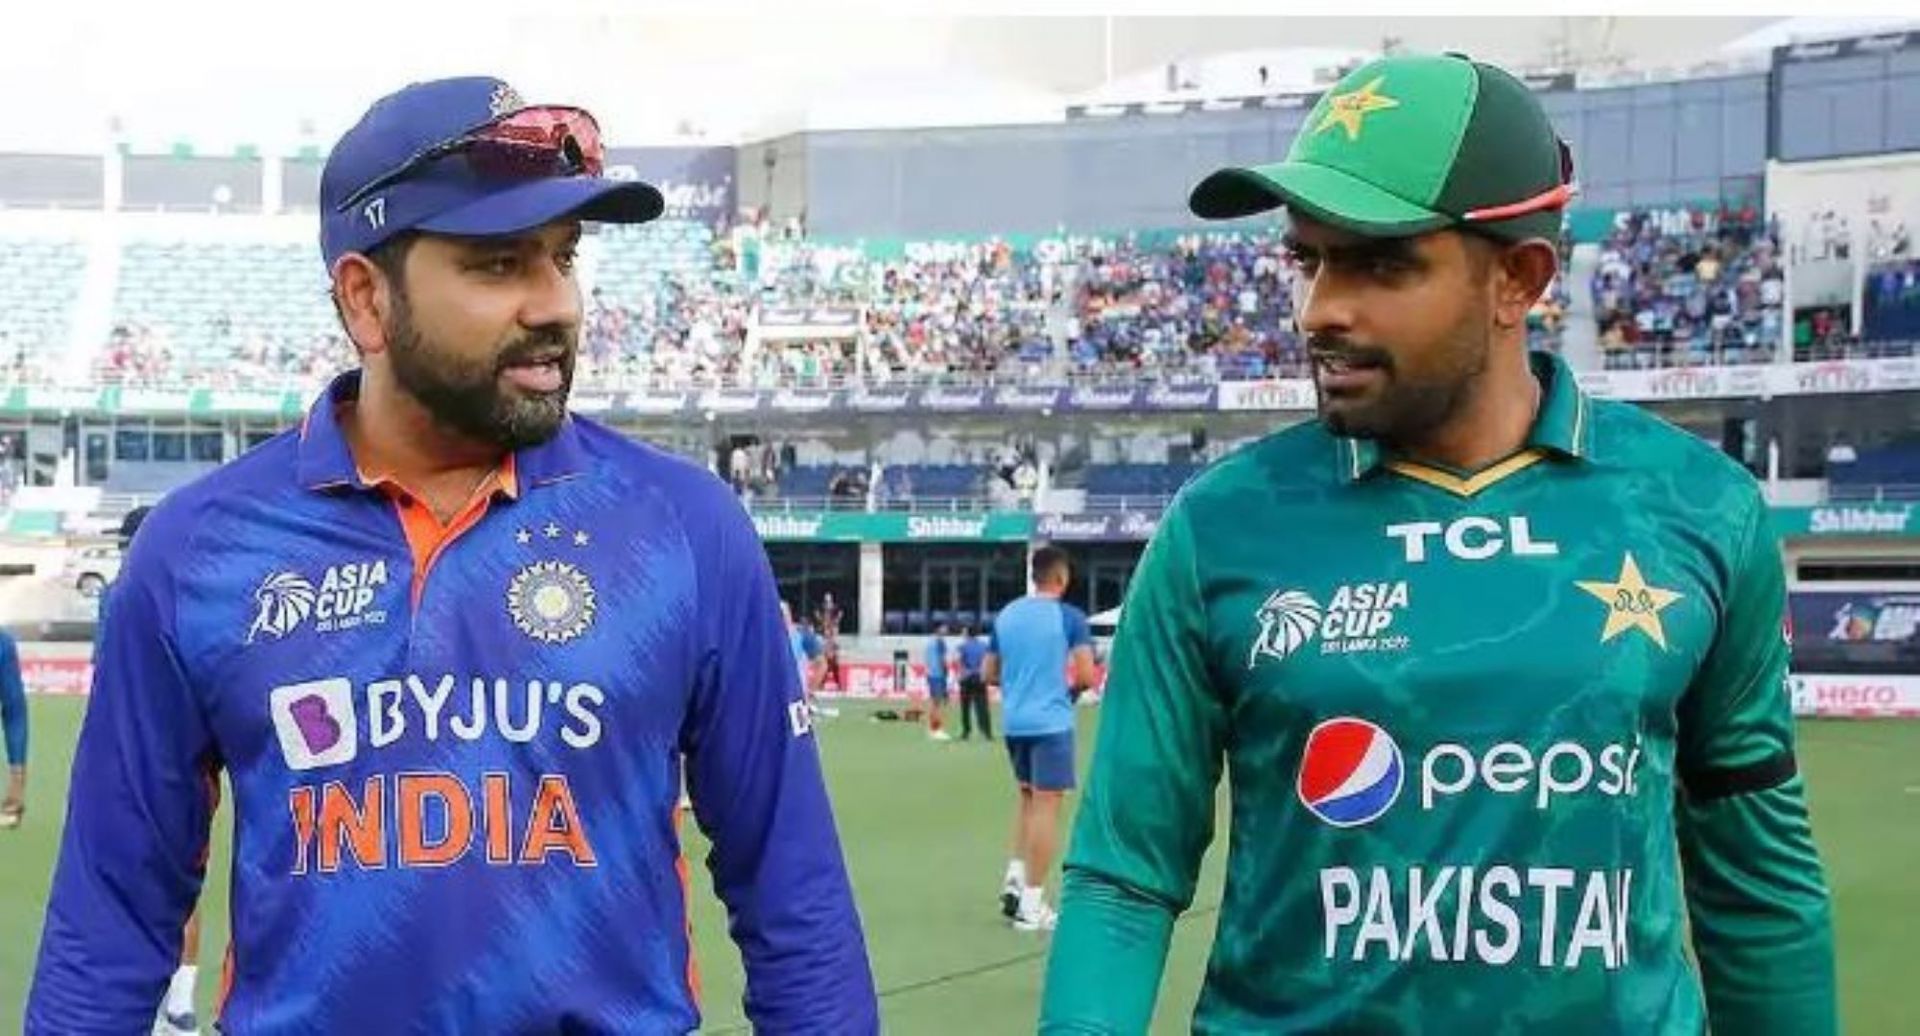 Rohit Sharma and Babar Azam will look to rewrite Asia Cup history in this edition.